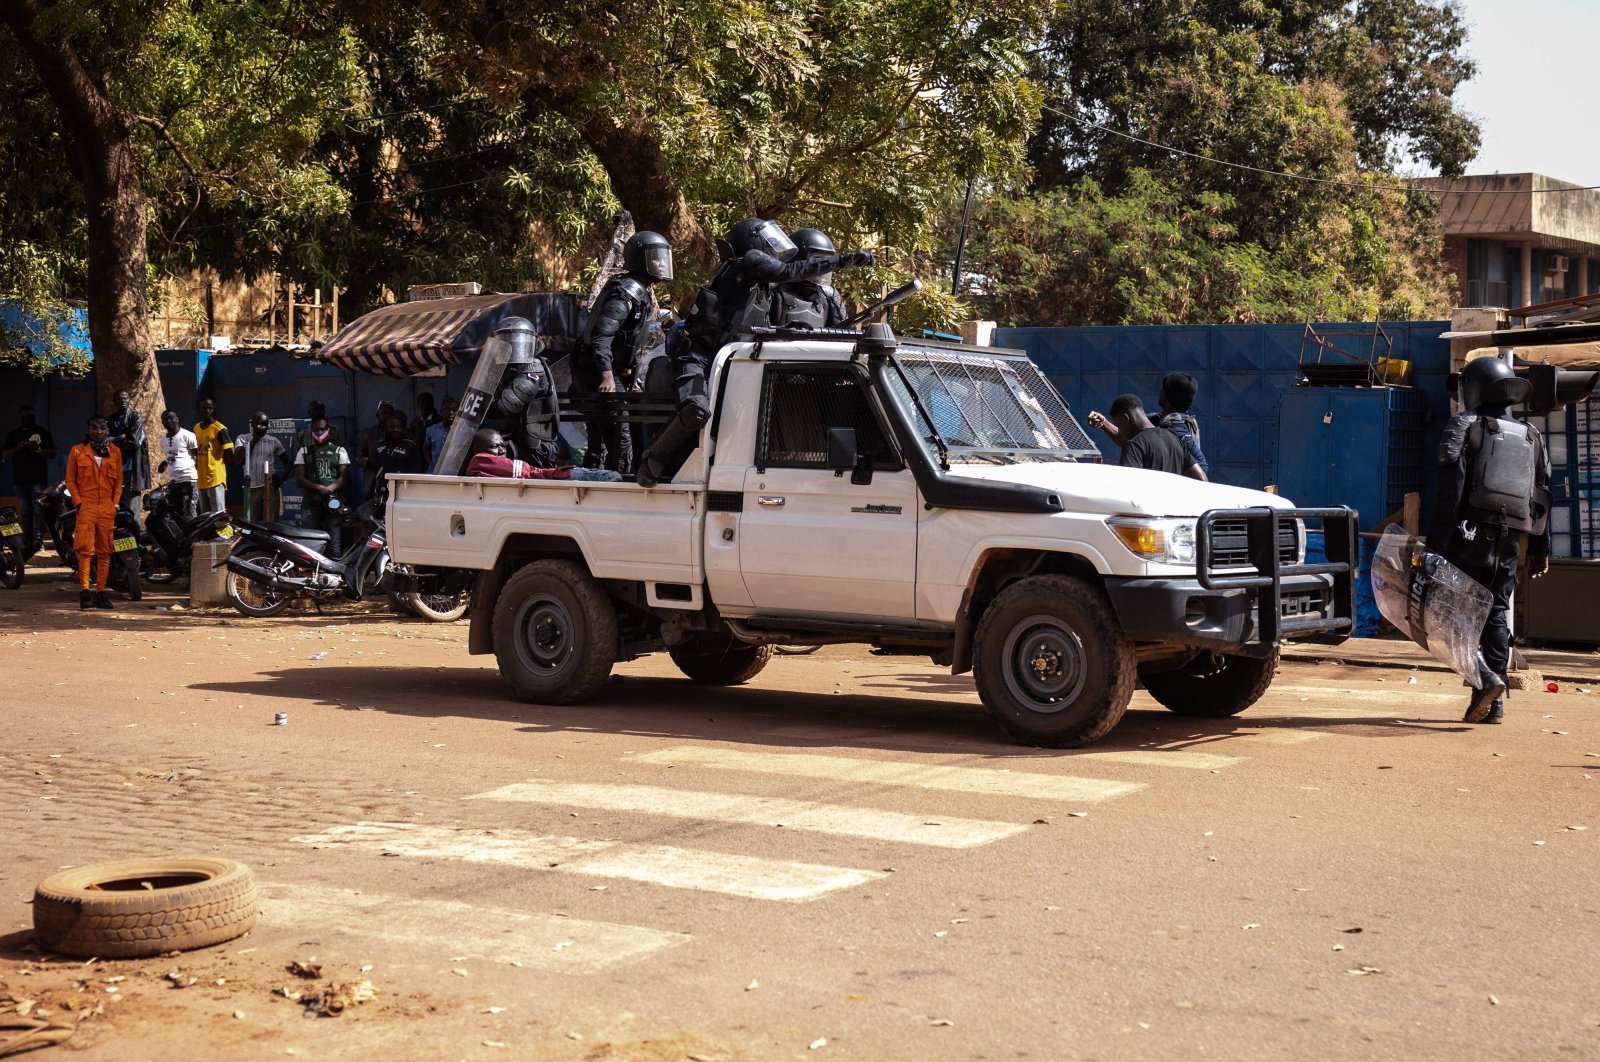 Security forces patrol the streets during a demonstration in Ouagadougou, Burkina Faso, Jan. 22, 2022. (AFP Photo)